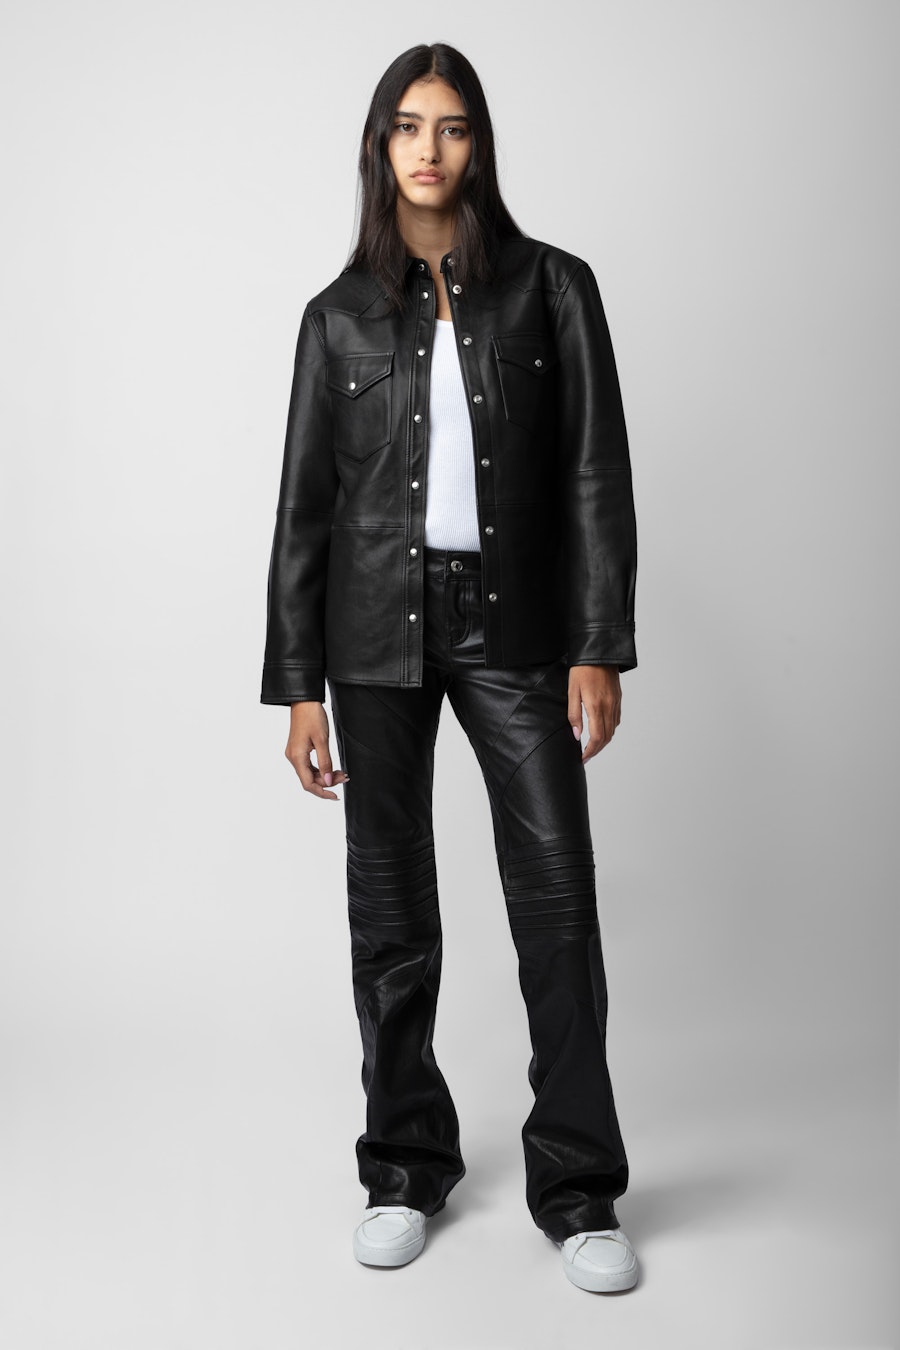 ZADIG&VOLTAIRE Thelma Leather Shirt